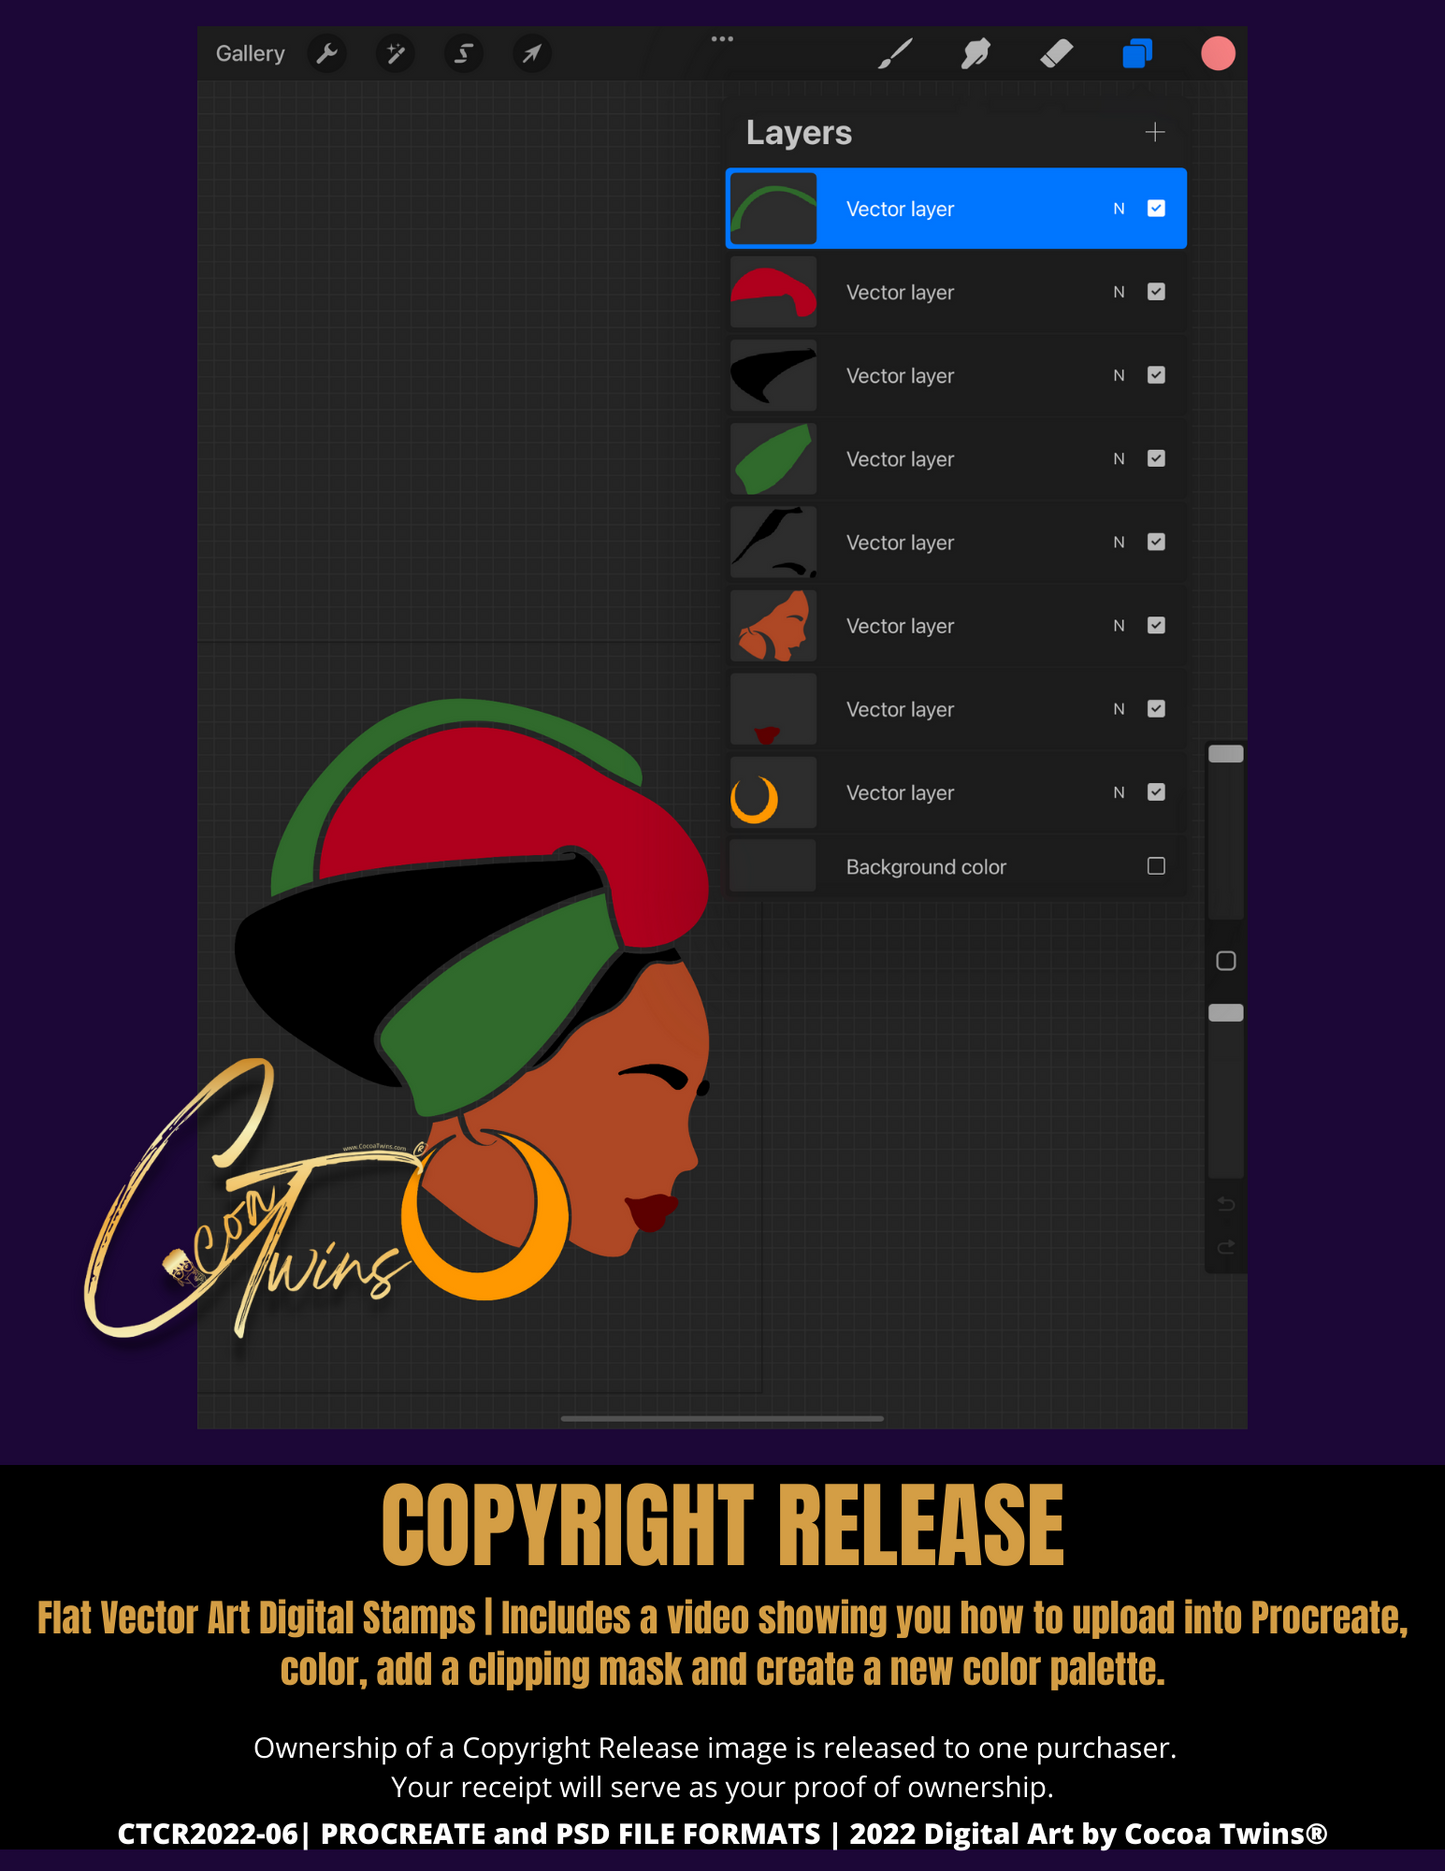 CTCR2022-06 | Copyright Release | A Digital Stamp for Use with Procreate, Adobe Fresco and/or Adobe Photoshop | 2022